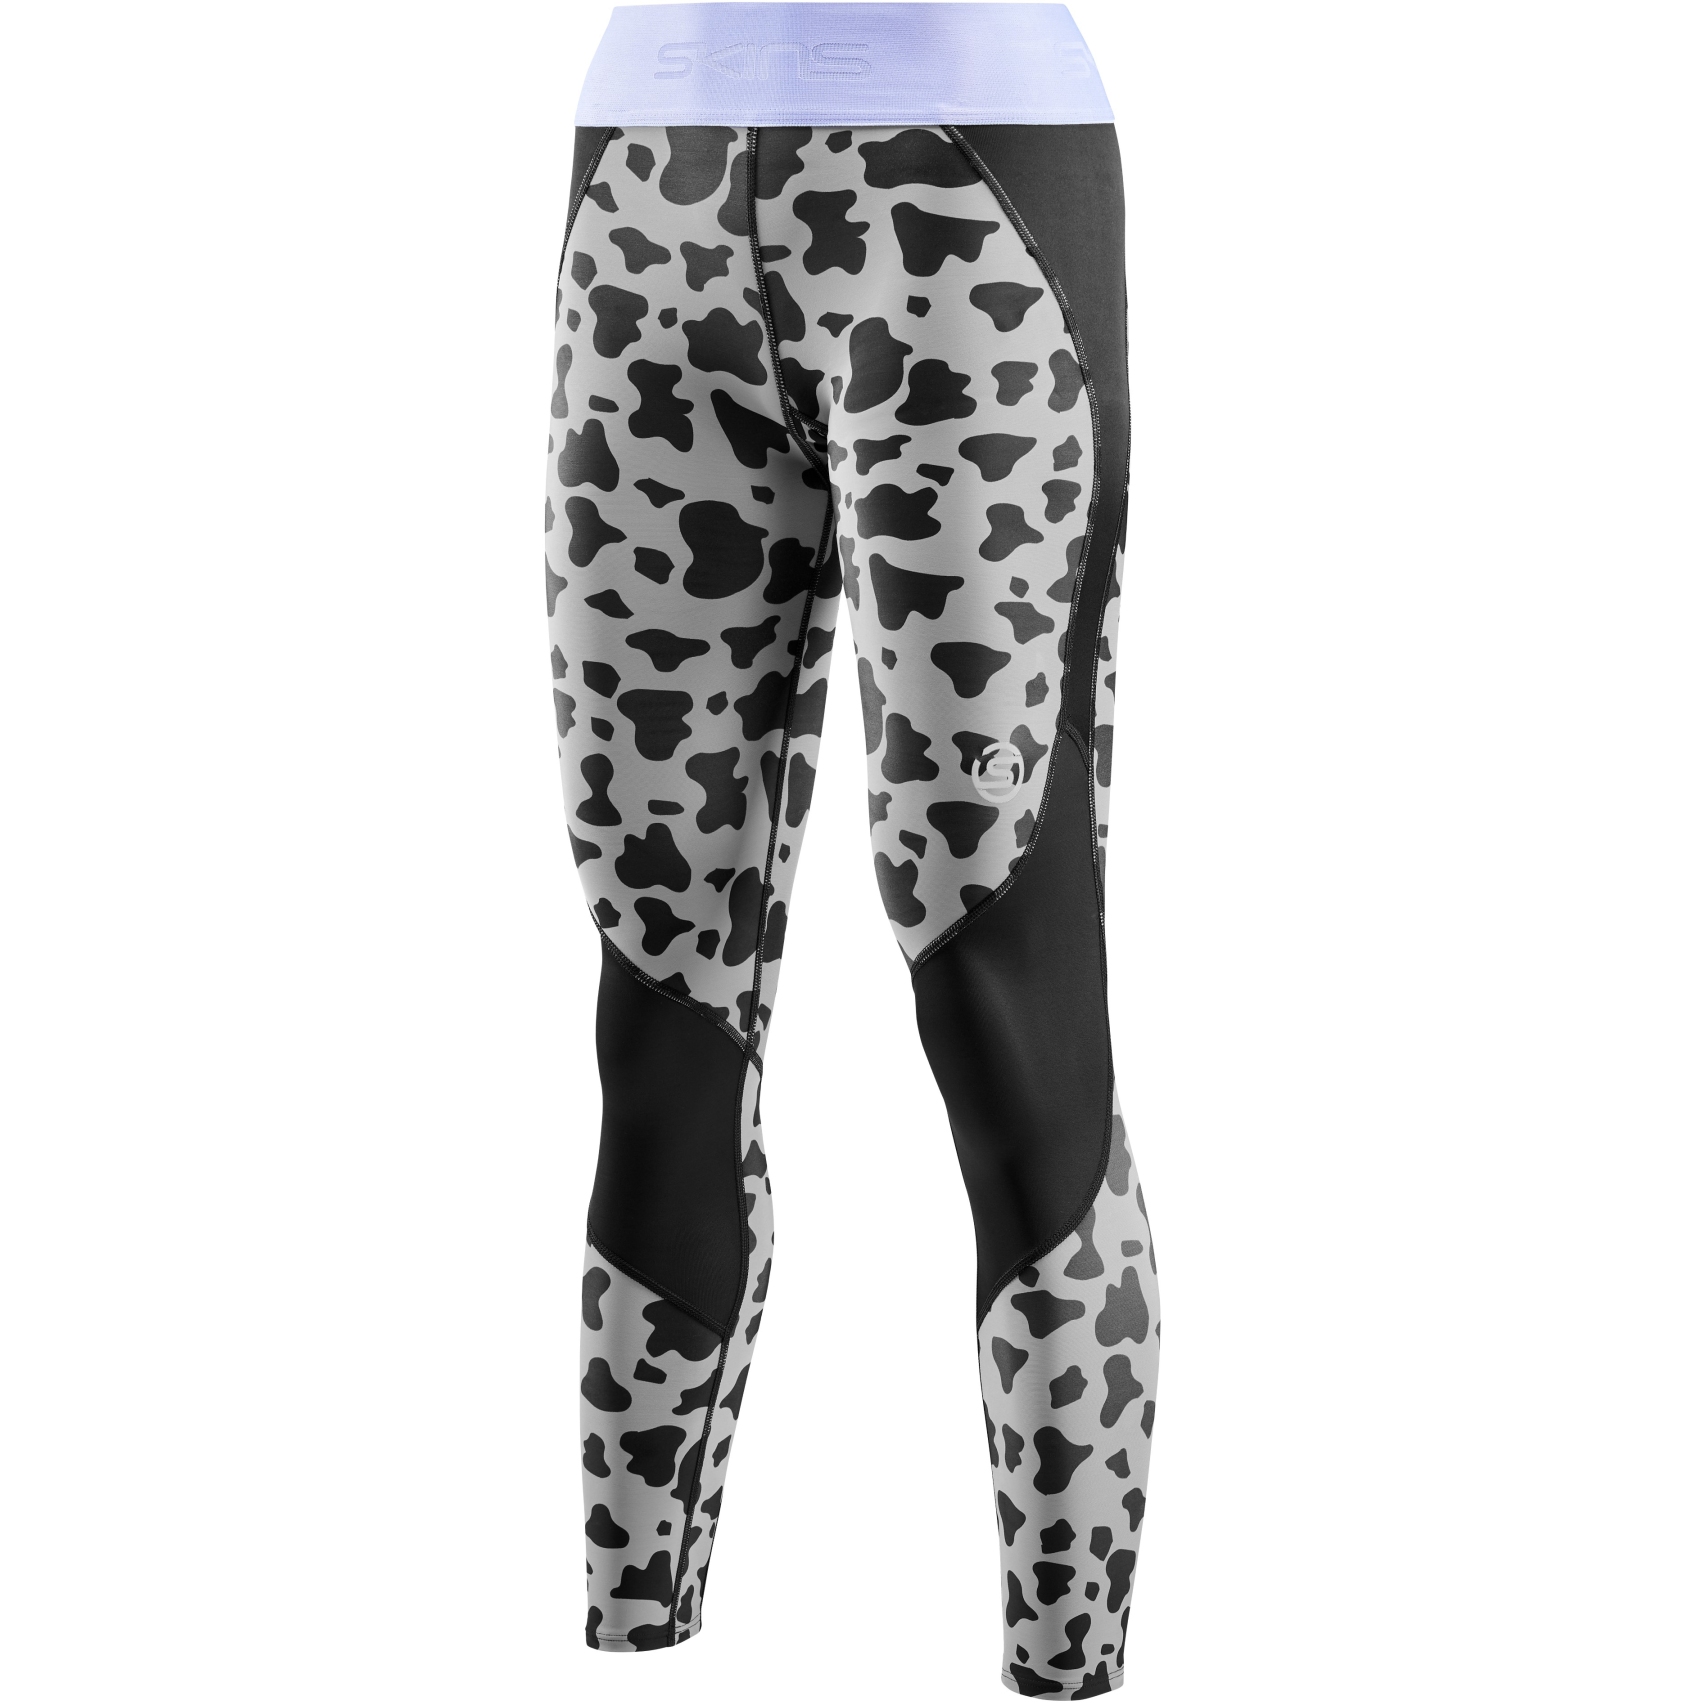 Image of SKINS Compression 3-Series Long Tights Women - Animal Black